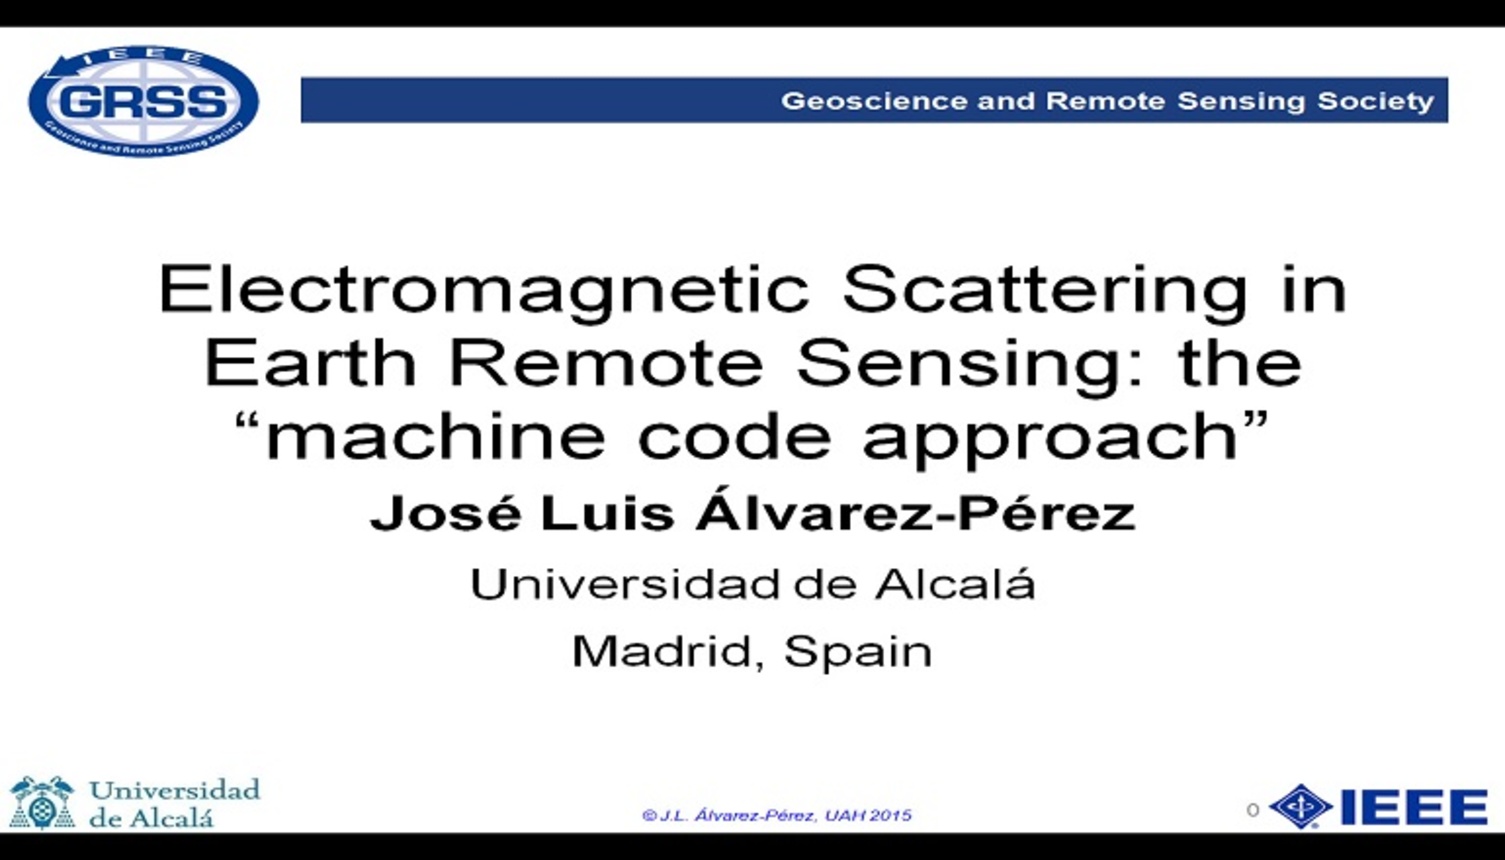 Electromagnetic Scattering in Earth Remote Sensing: the "machine code approach"